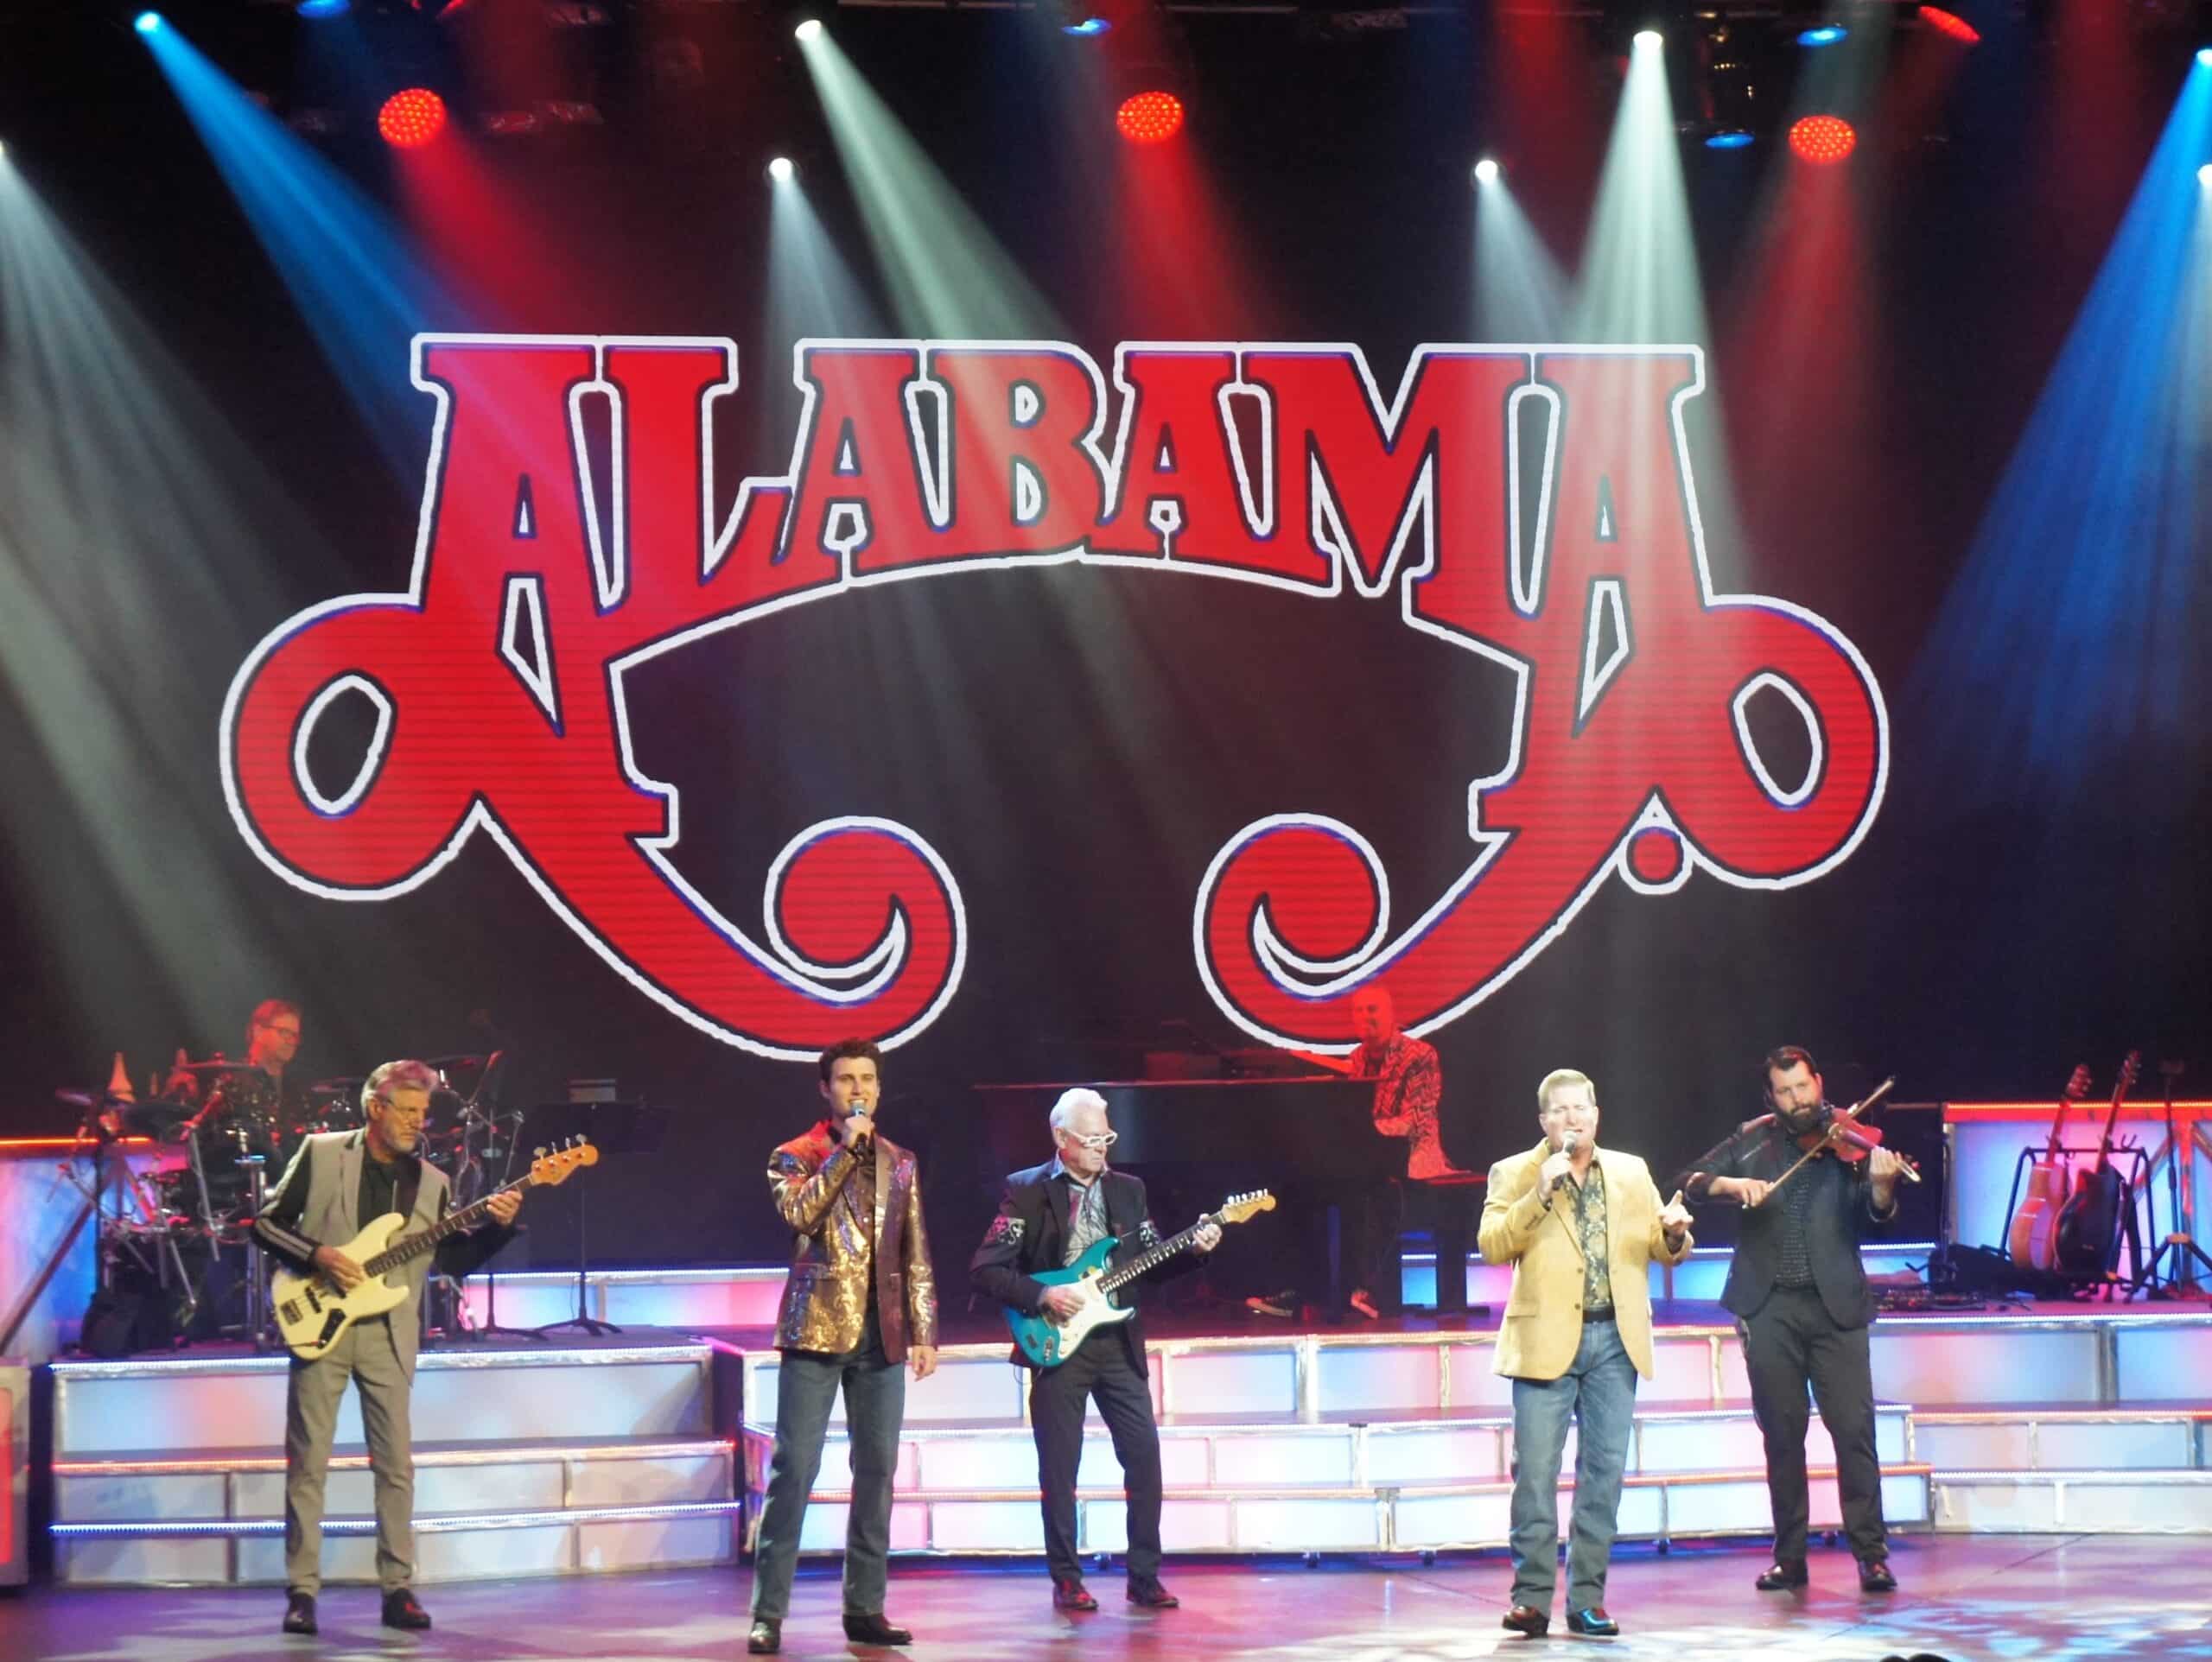 Paying tribute to the songs of the group Alabama